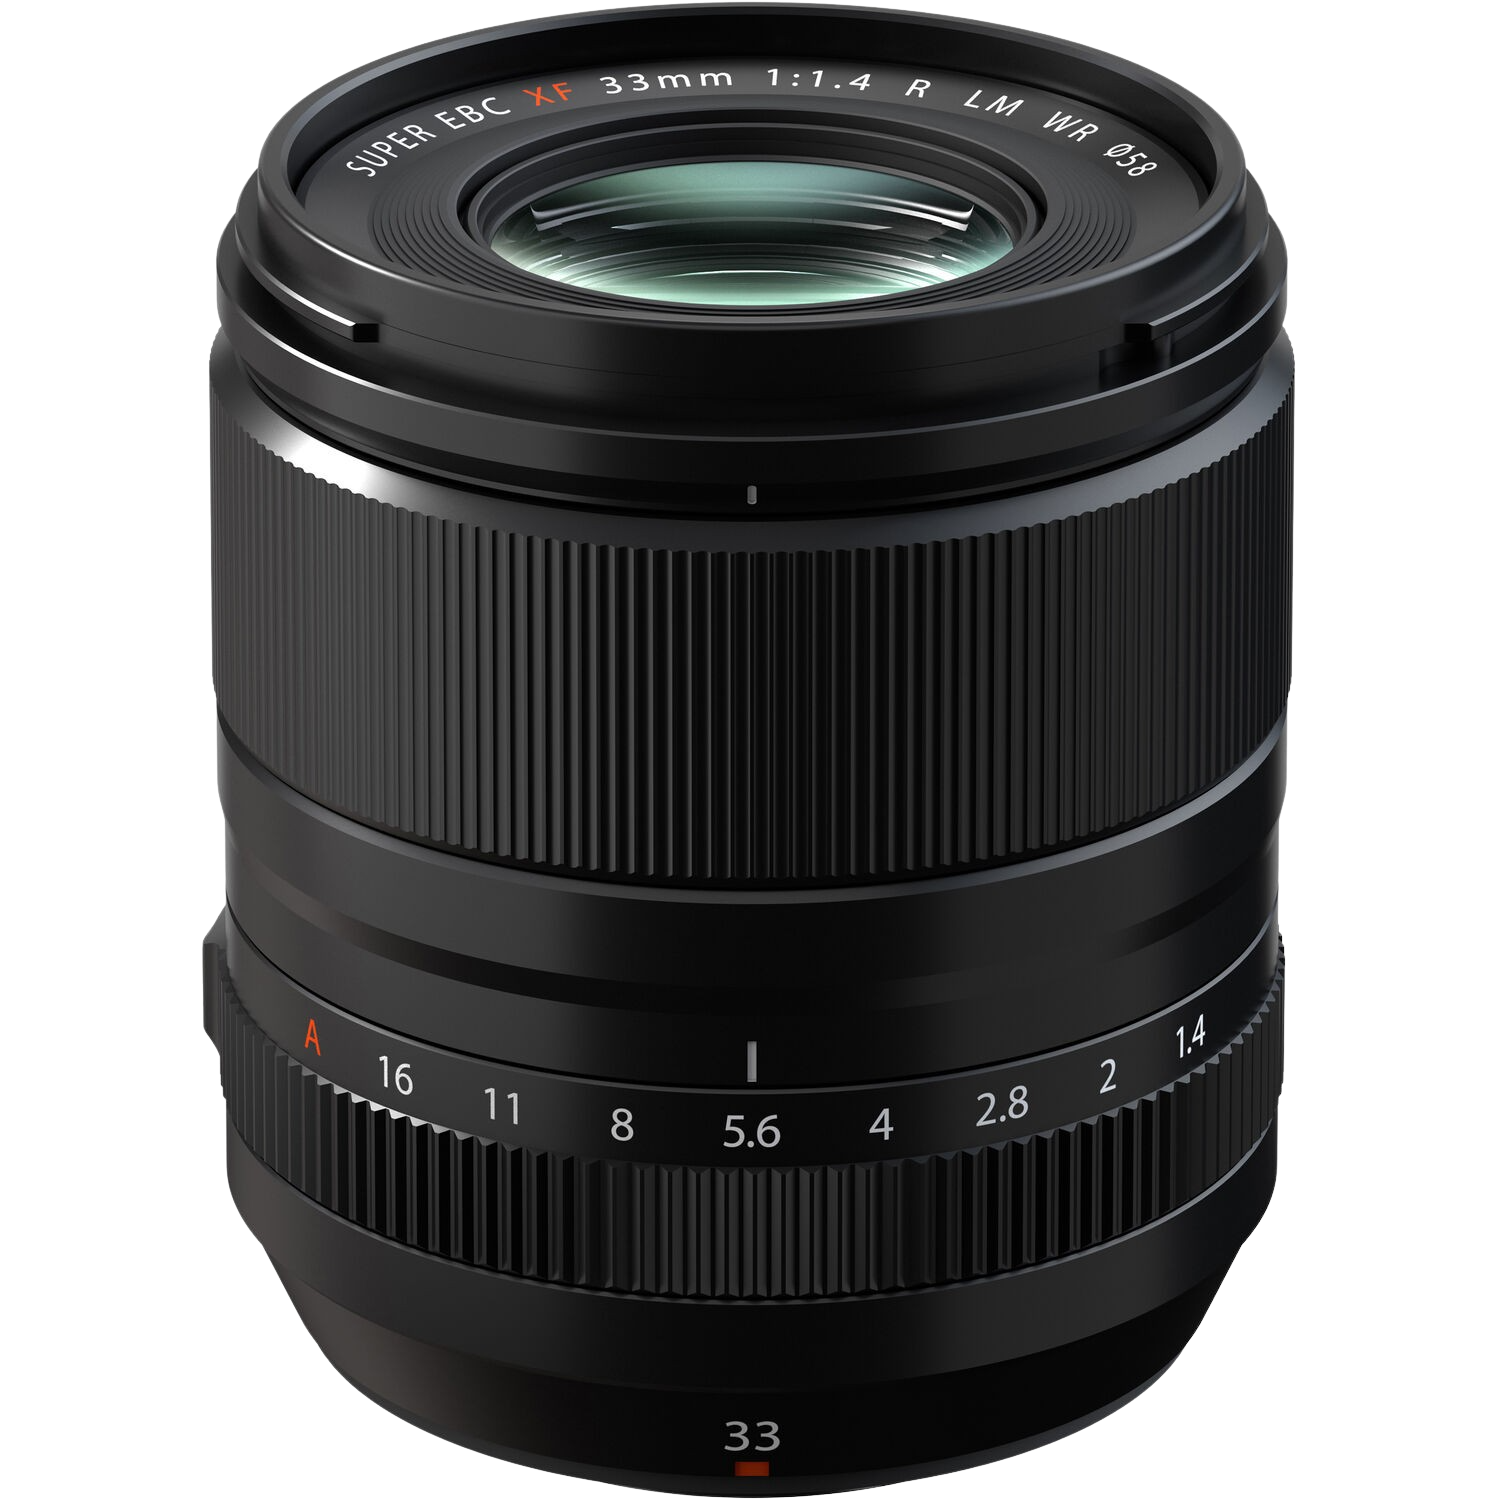 Rent Sigma 16mm f/1.4 DC DN C, Sony E-Mount from €12.90 per month